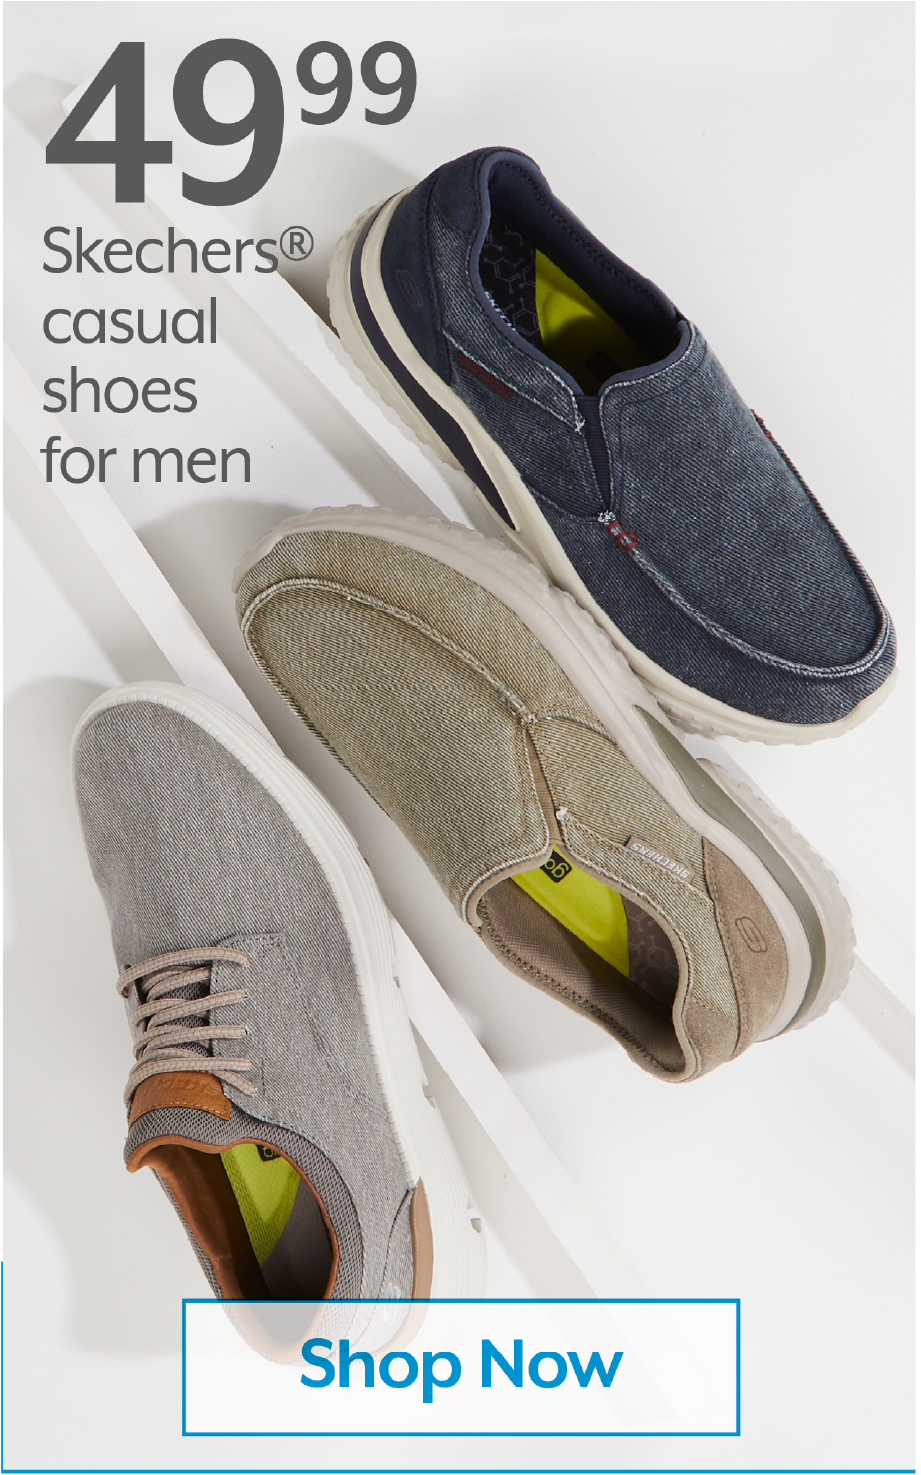 49.99 Skechers® casual shoes for men